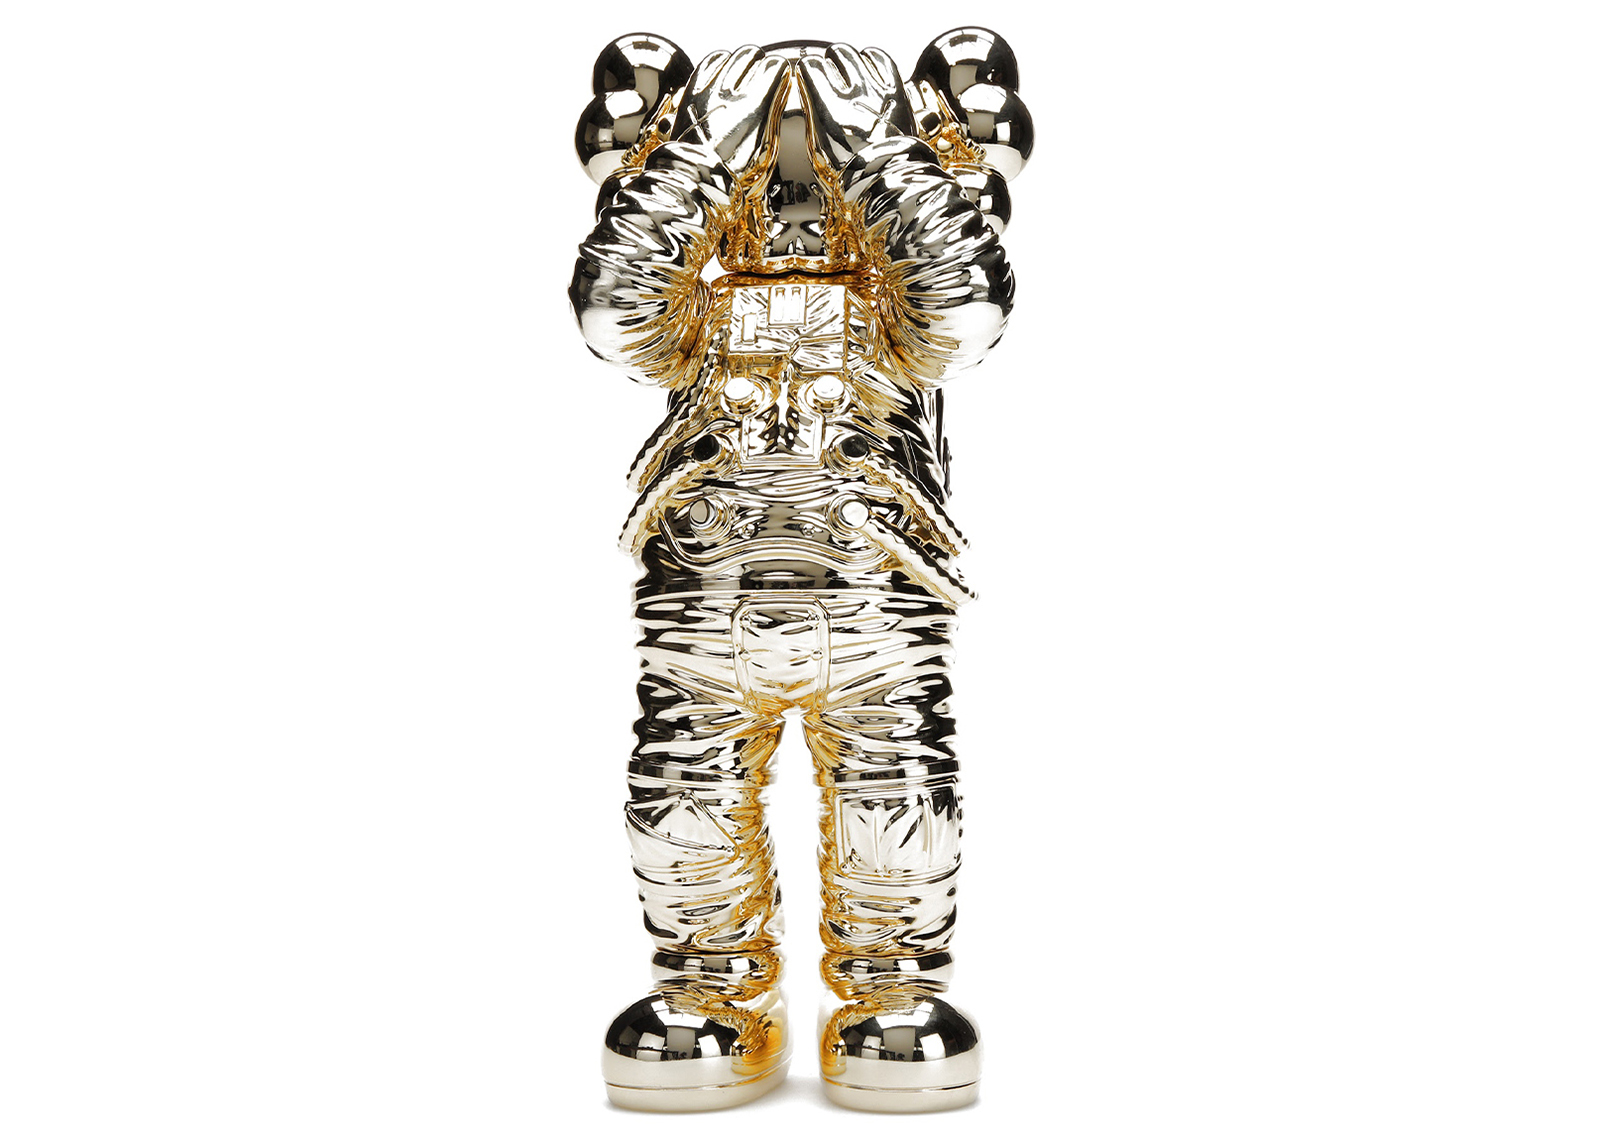 KAWS Holiday Space Figure Gold - US